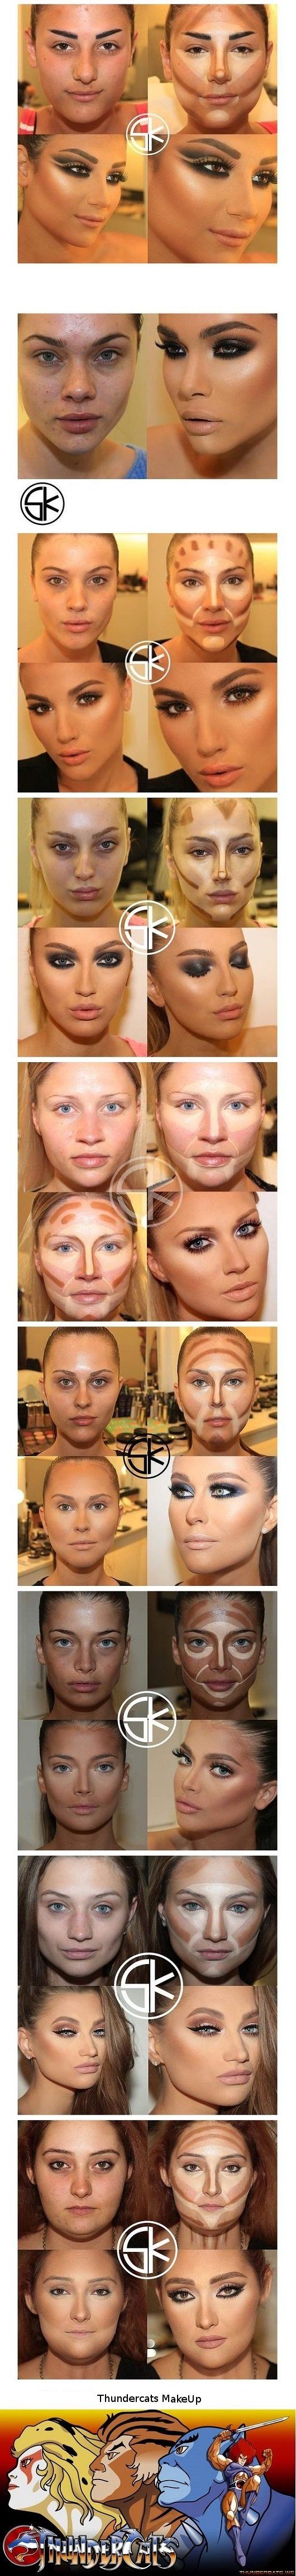 funny-makeup-before-after-lies